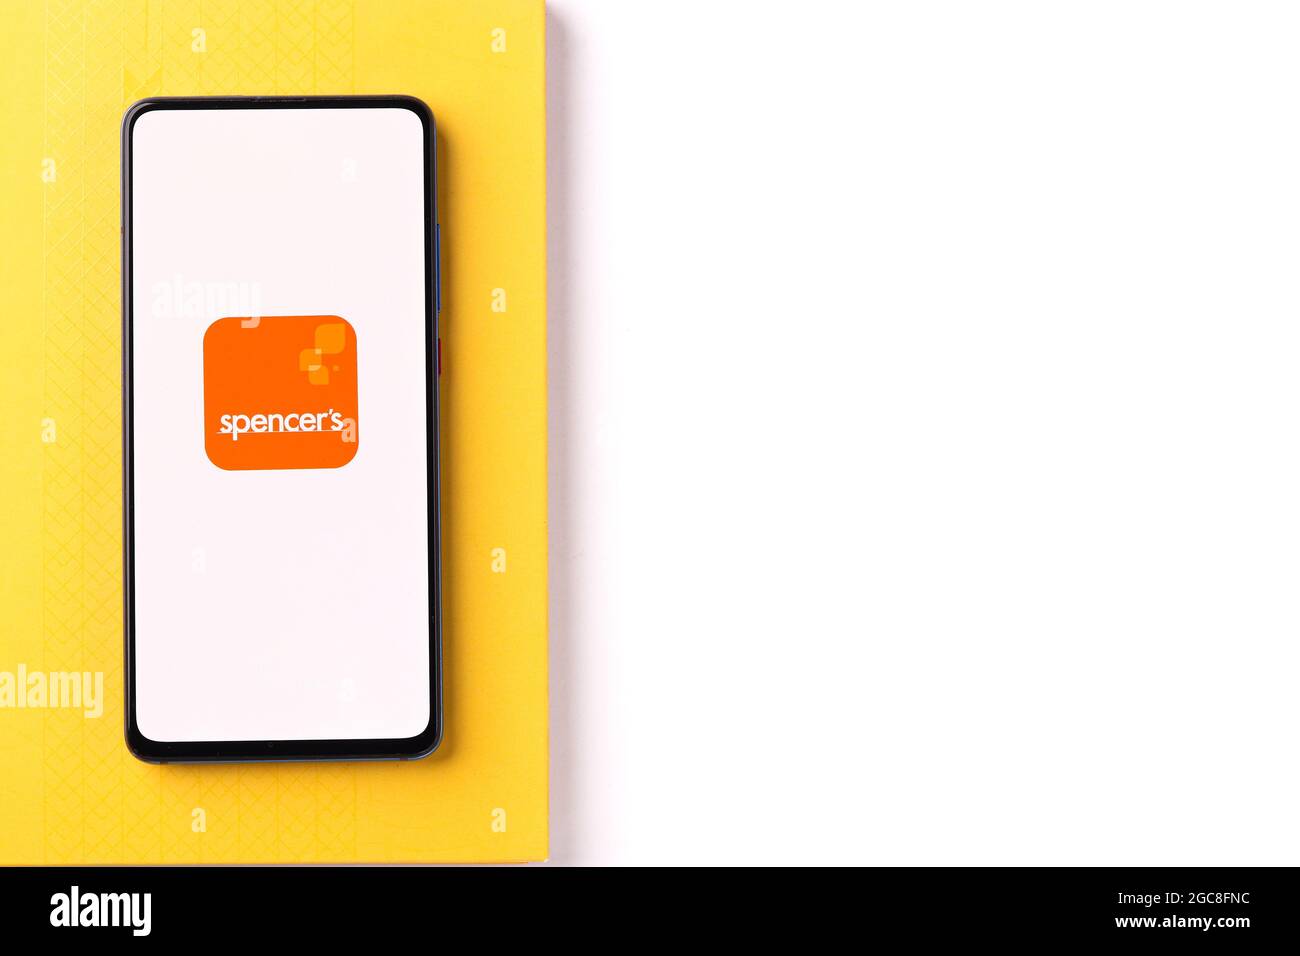 Assam, India - August 6, 2021 : Spencer's Retail logo on phone screen stock image. Stock Photo